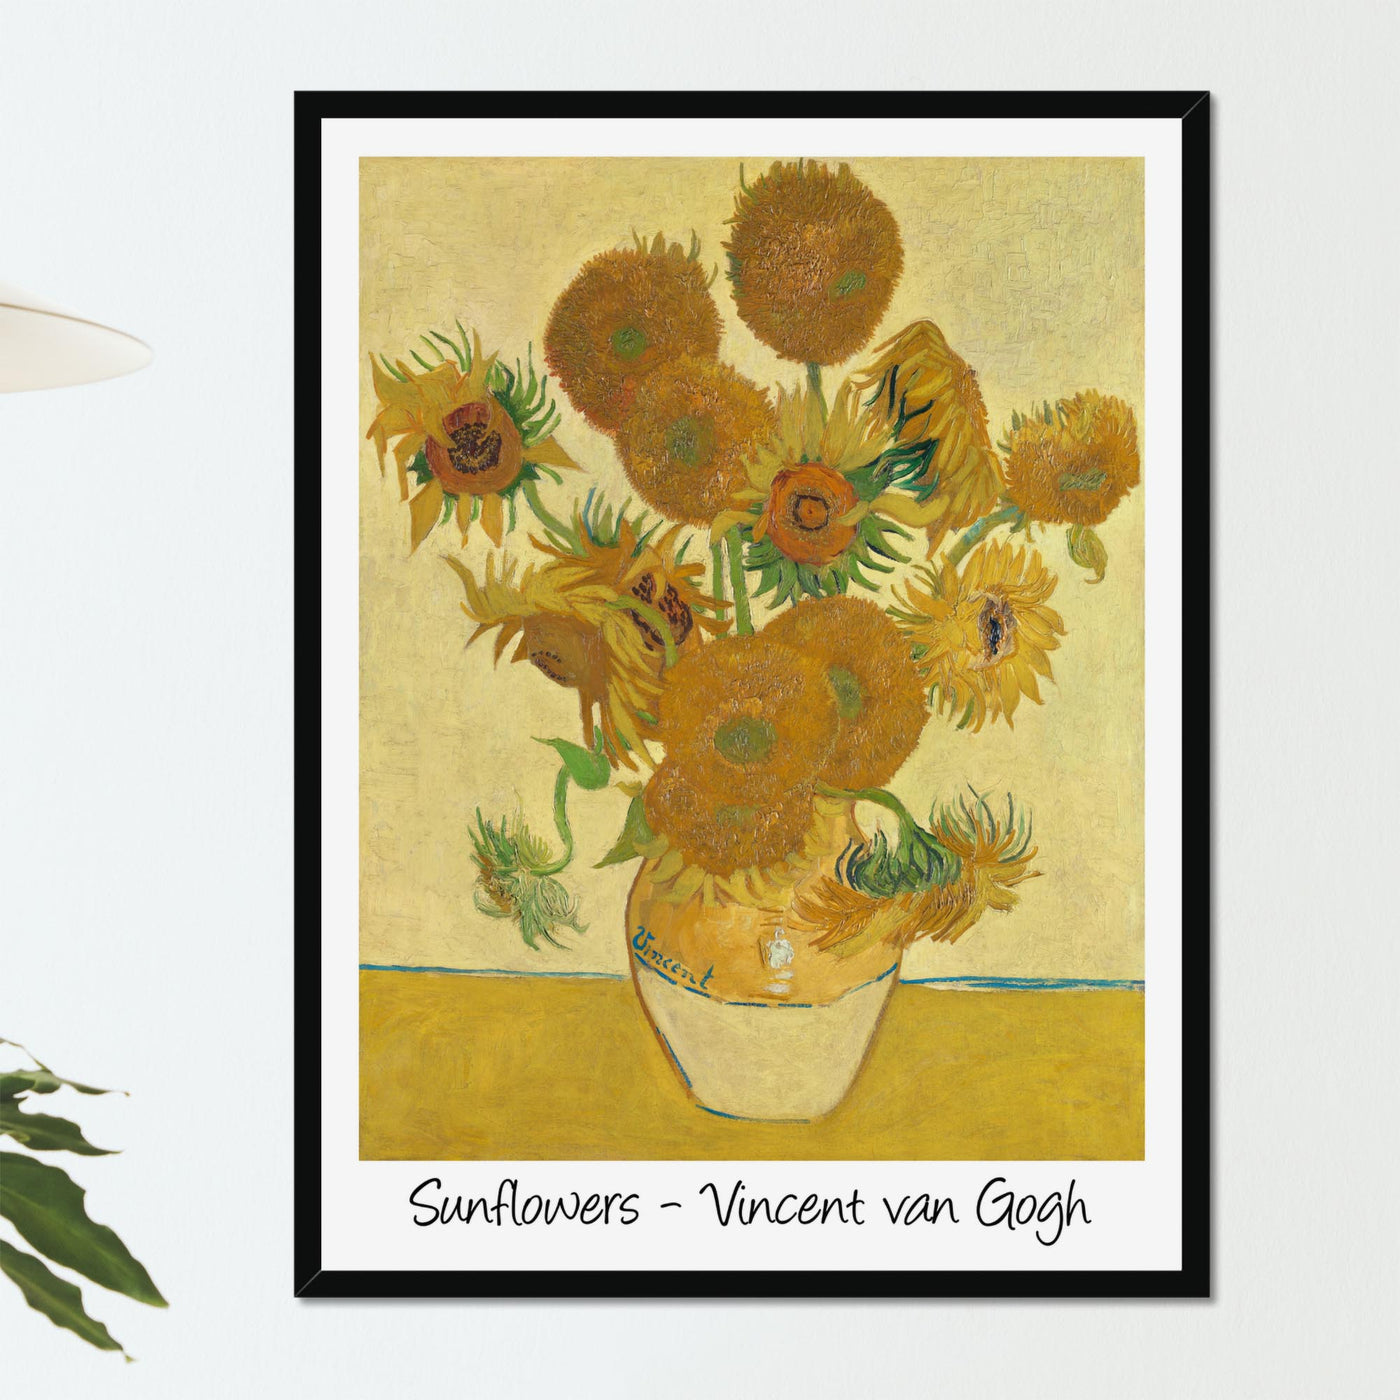 "Sunflowers" by Vincent van Gogh on Framed Prints, Aluminium, Acrylic, Canvas or Print-only